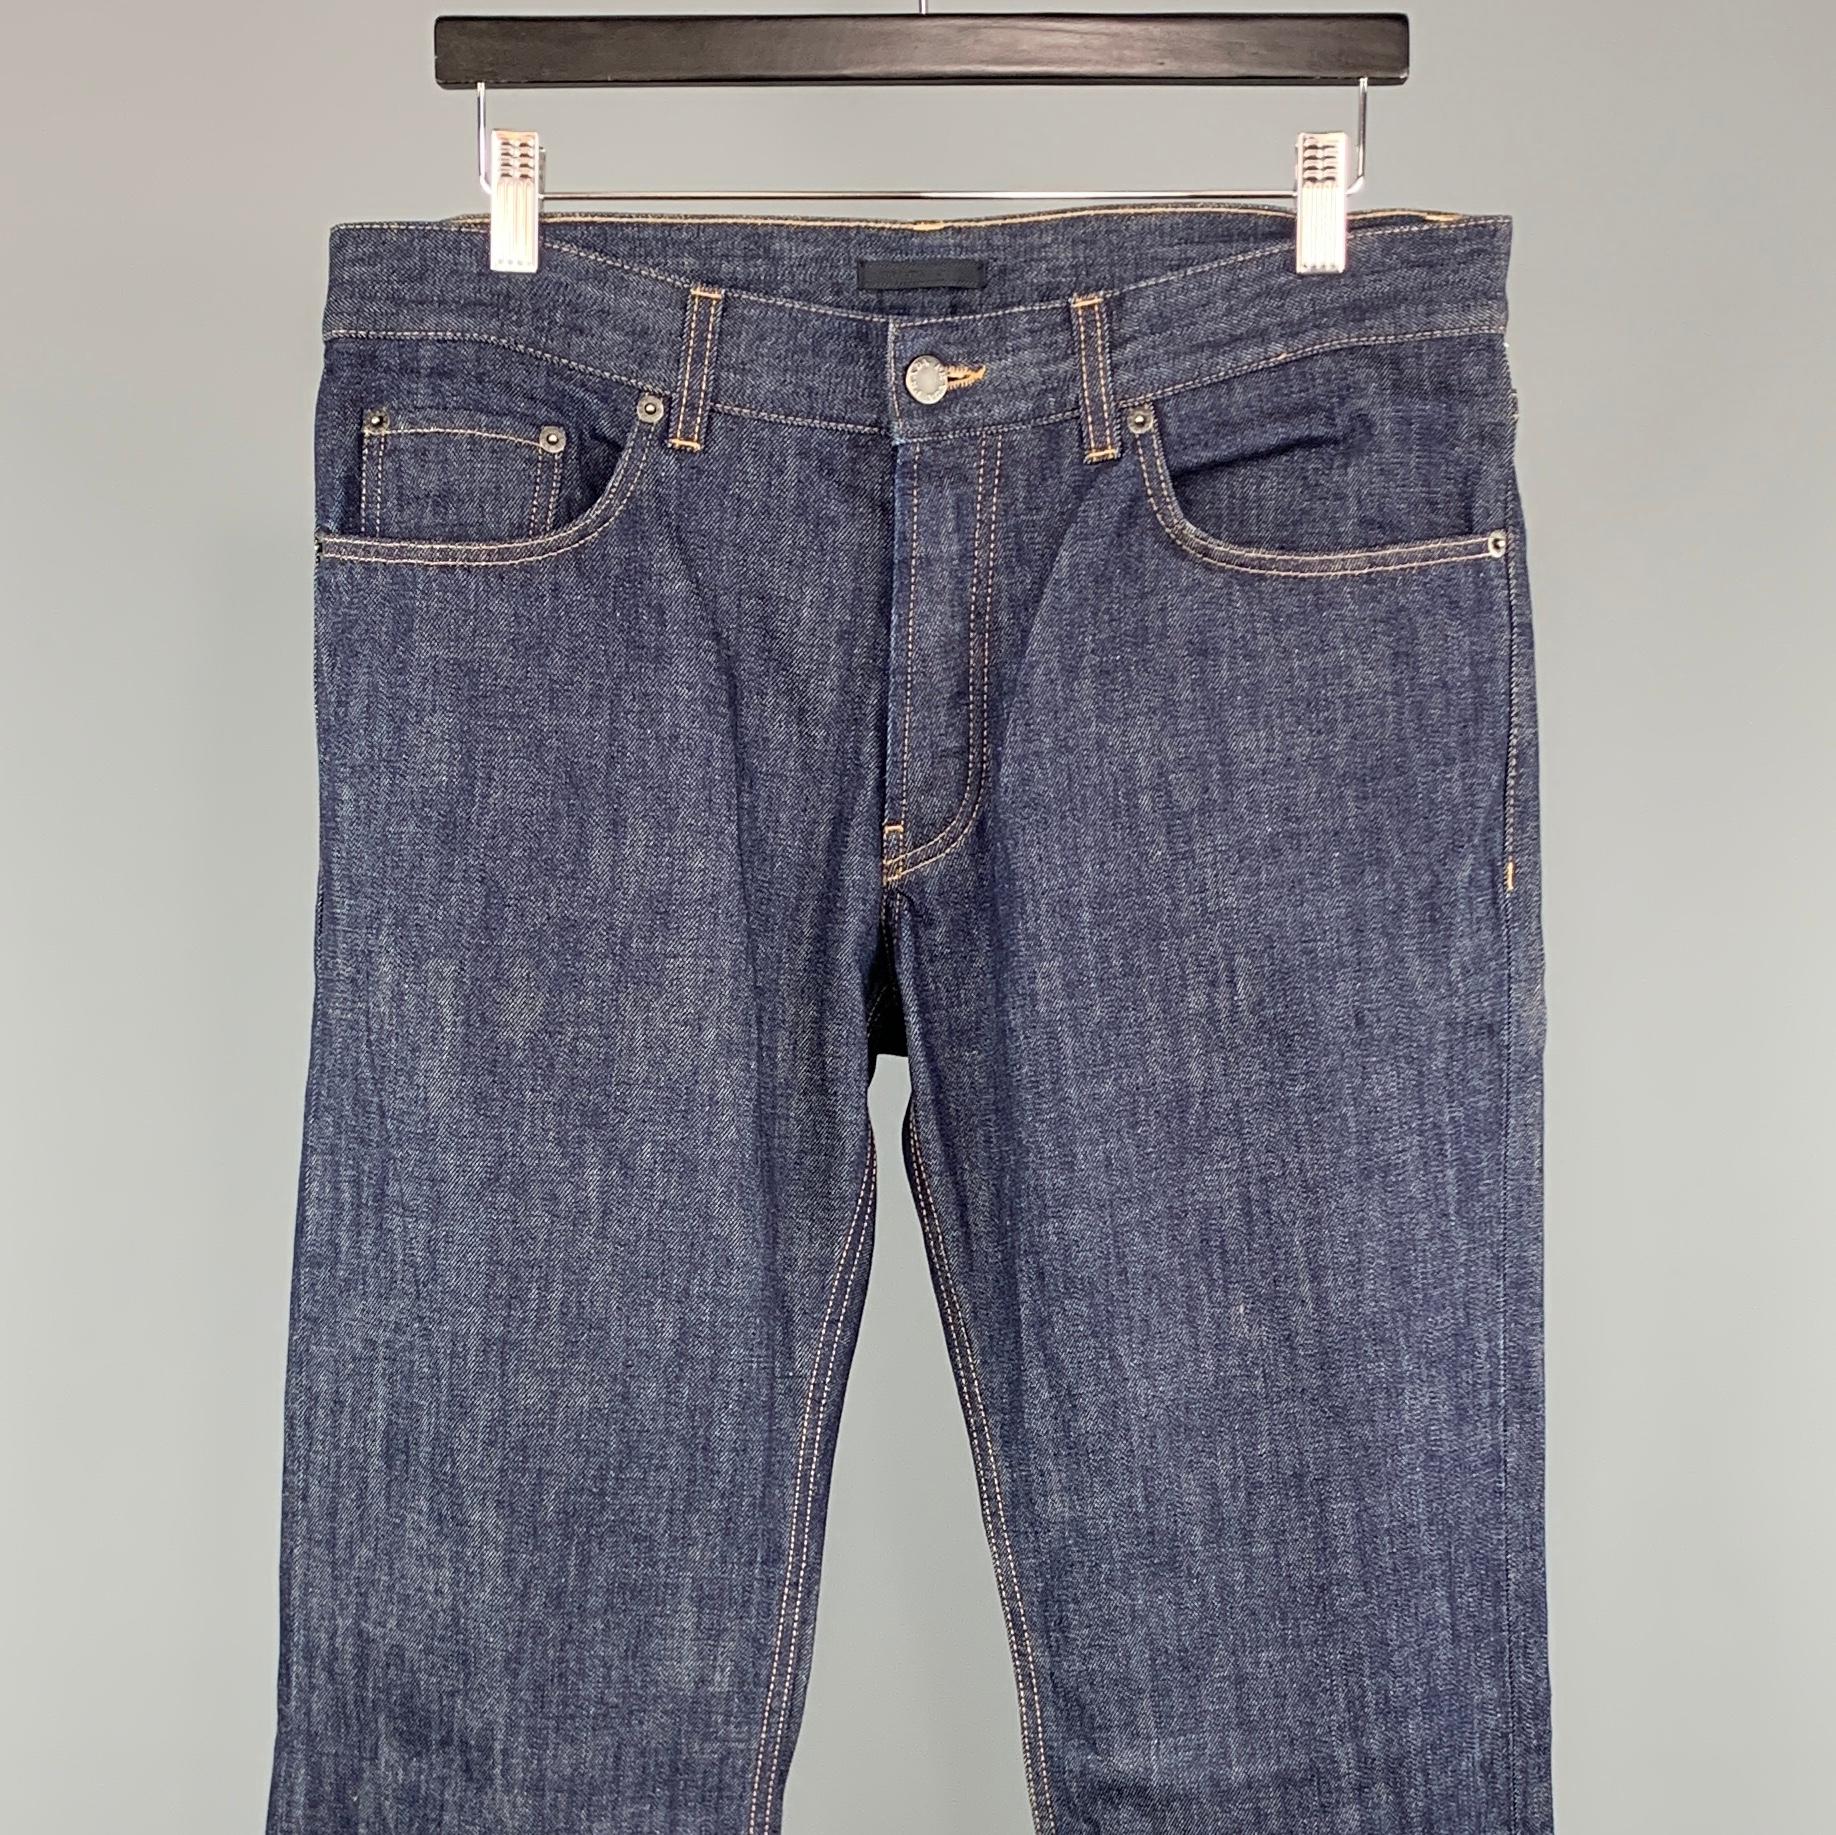 PRADA jeans comes in a indigo cotton featuring a straight leg style, contrast stitching, and a button fly. Made in Romania.
 
Excellent Pre-Owned Condition.
Marked: 33
 
Measurements:
 
Waist: 33 in.
Rise: 8.5 in.
Inseam: 34 in.